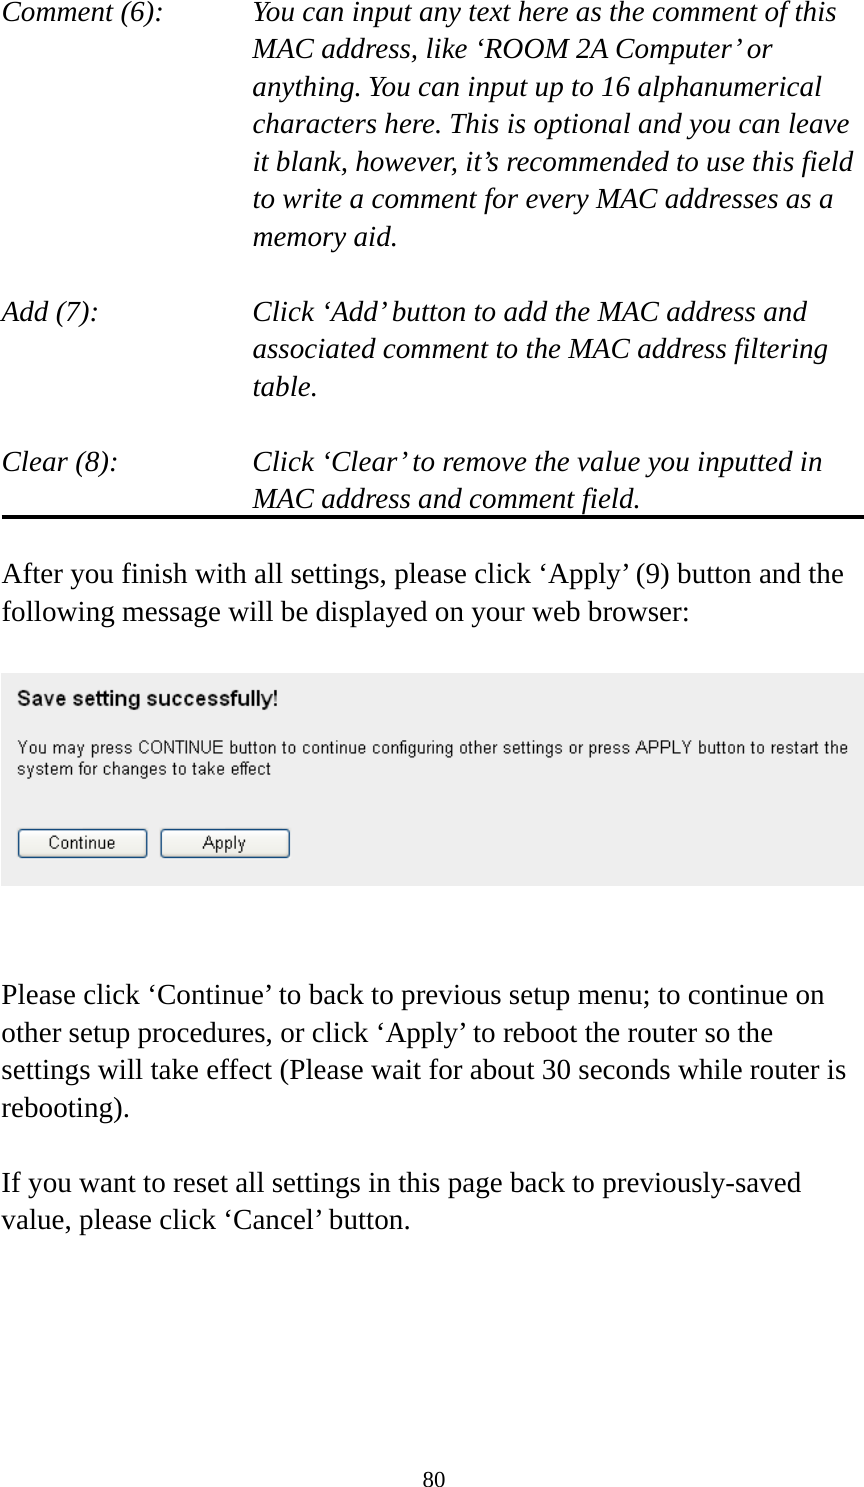 80 Comment (6):      You can input any text here as the comment of this       MAC address, like ‘ROOM 2A Computer’ or         anything. You can input up to 16 alphanumerical   characters here. This is optional and you can leave   it blank, however, it’s recommended to use this field   to write a comment for every MAC addresses as a   memory aid.  Add (7):    Click ‘Add’ button to add the MAC address and associated comment to the MAC address filtering table.  Clear (8):    Click ‘Clear’ to remove the value you inputted in MAC address and comment field.  After you finish with all settings, please click ‘Apply’ (9) button and the following message will be displayed on your web browser:     Please click ‘Continue’ to back to previous setup menu; to continue on other setup procedures, or click ‘Apply’ to reboot the router so the settings will take effect (Please wait for about 30 seconds while router is rebooting).  If you want to reset all settings in this page back to previously-saved value, please click ‘Cancel’ button.  